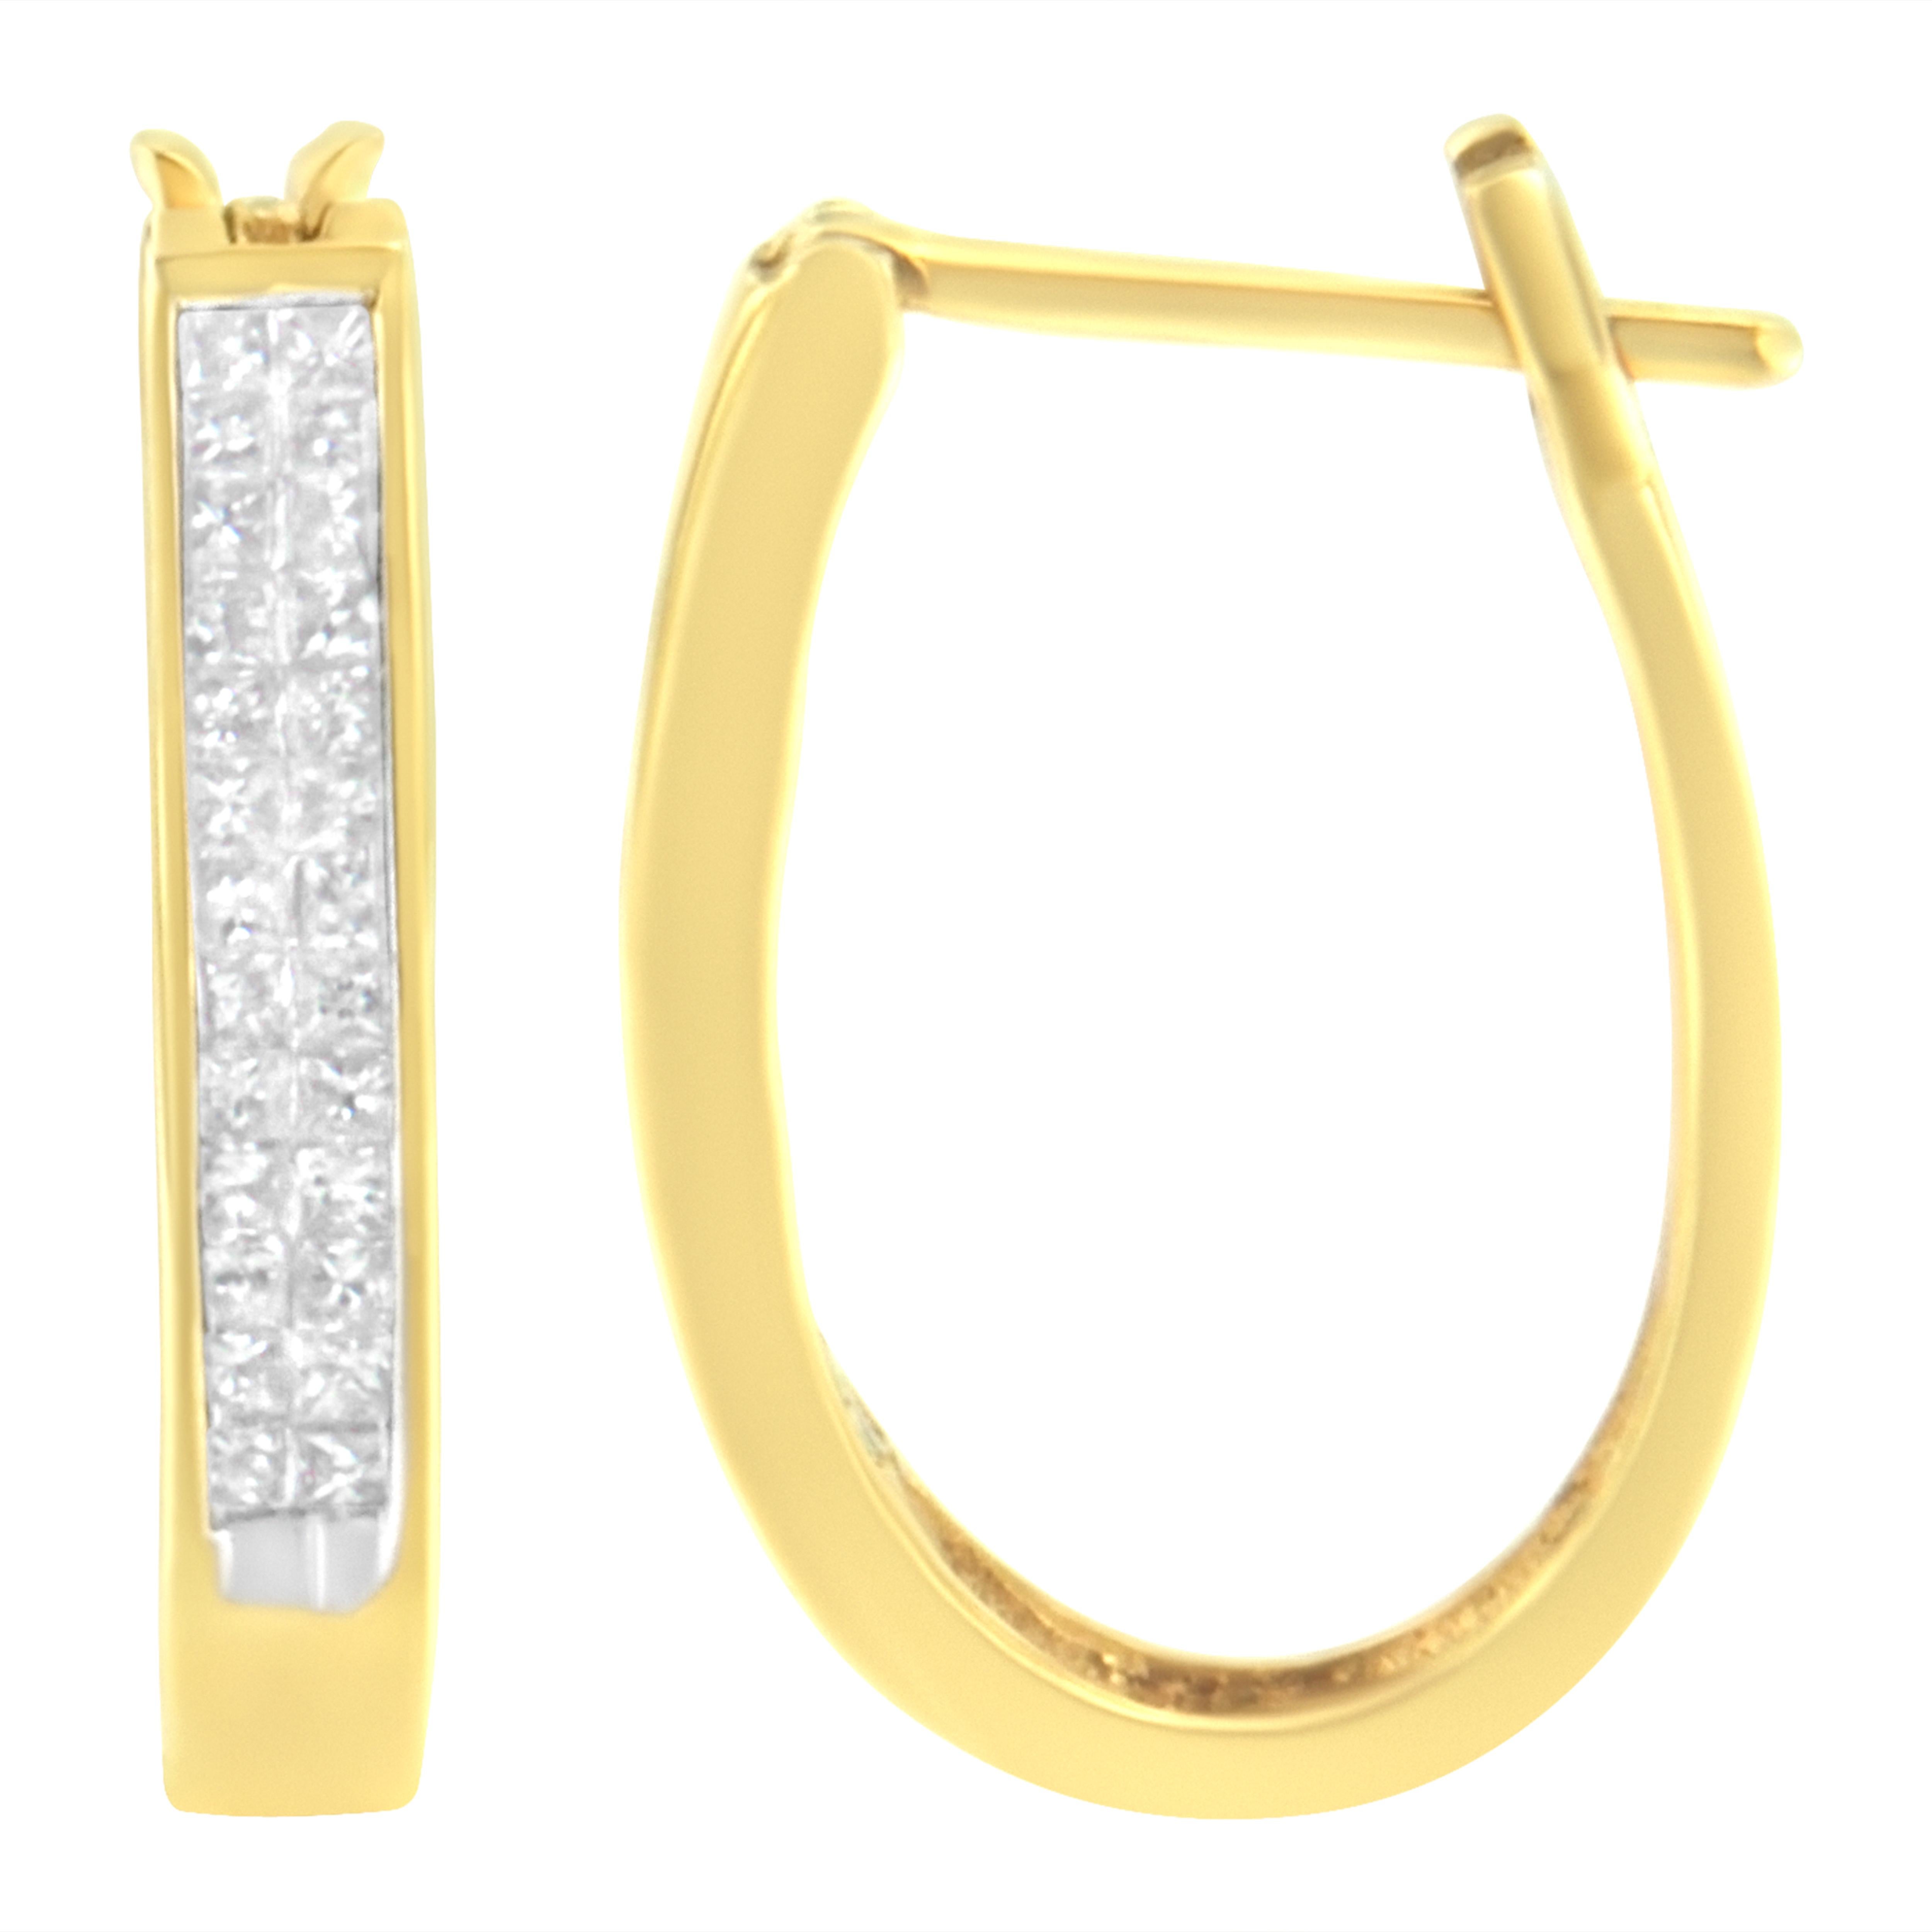 Uniquely set in an invisible setting, princess-cut diamonds shine in the outer part of these gorgeous 10k yellow gold hoop earrings. This piece has a total diamond weight of 1/2 cttw. It's the perfect gift for a loved one on any special occasion, or